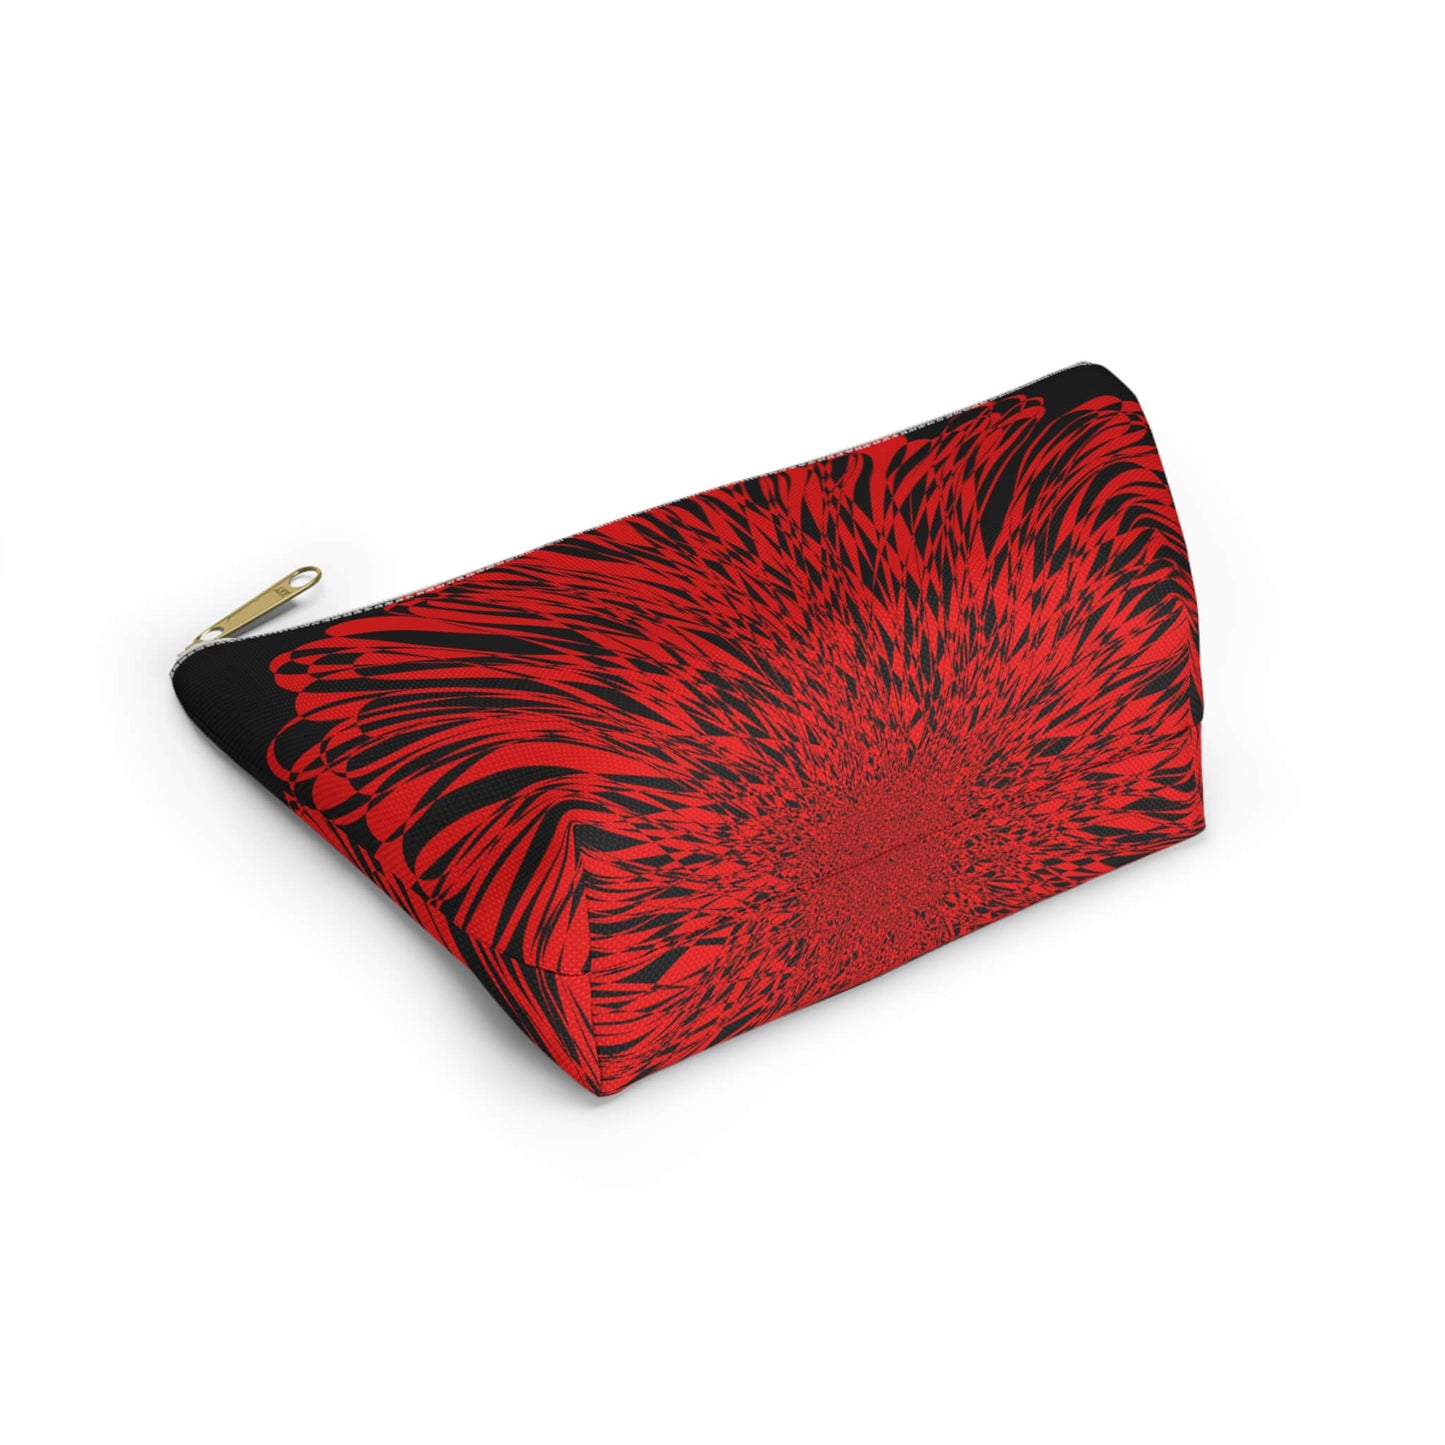 designer cosmetic pouch by oneowlartist.com